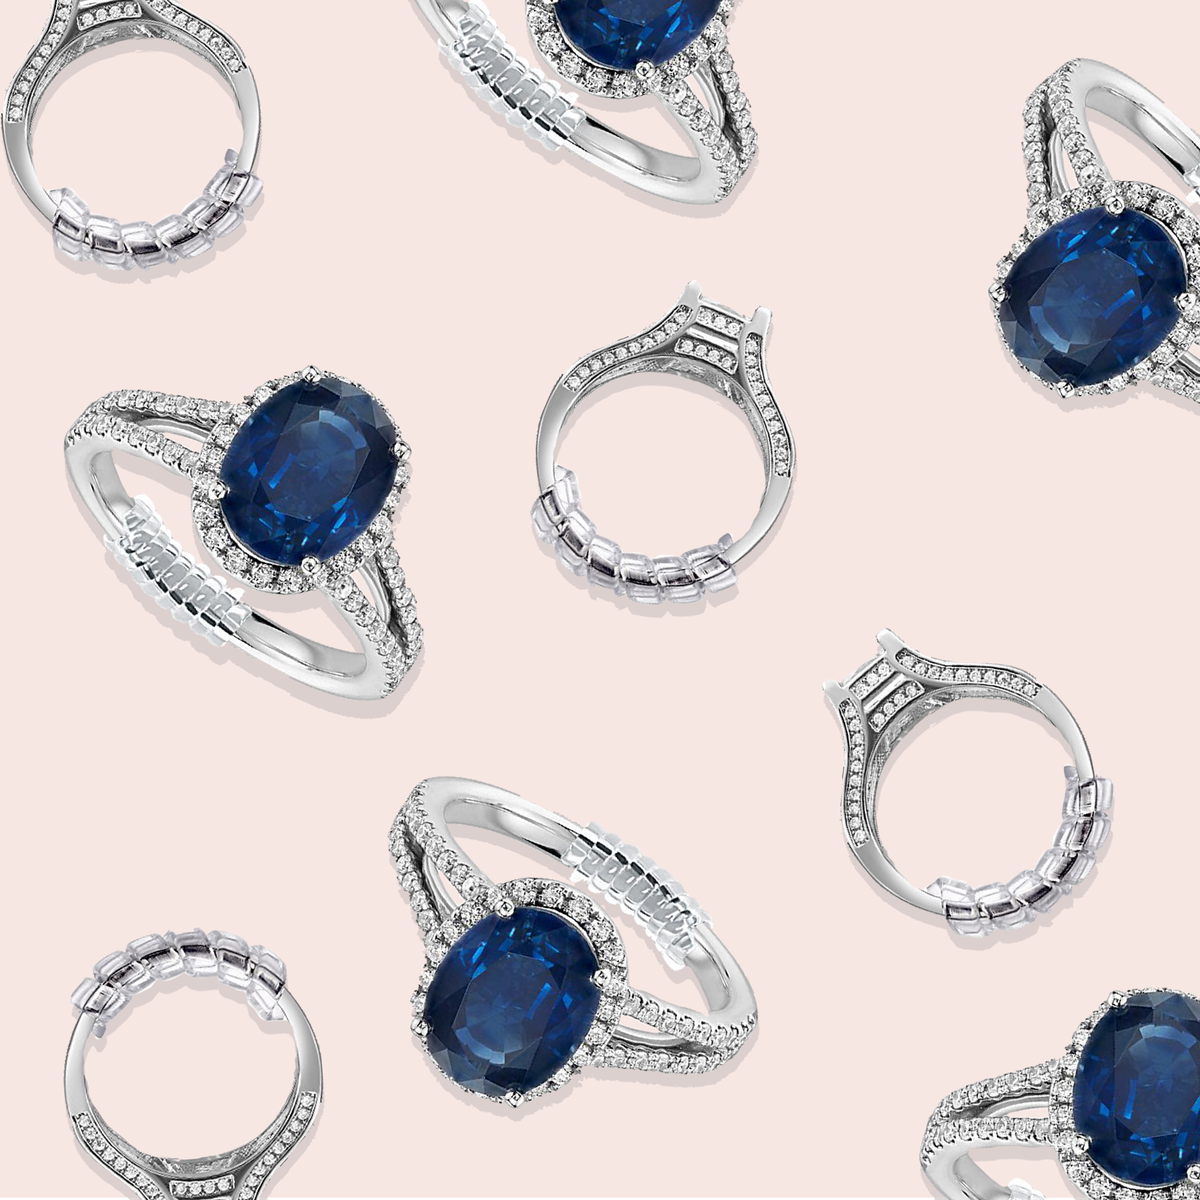 The 10 Best Ring Adjusters and Sizers for Your Everyday Jewelry